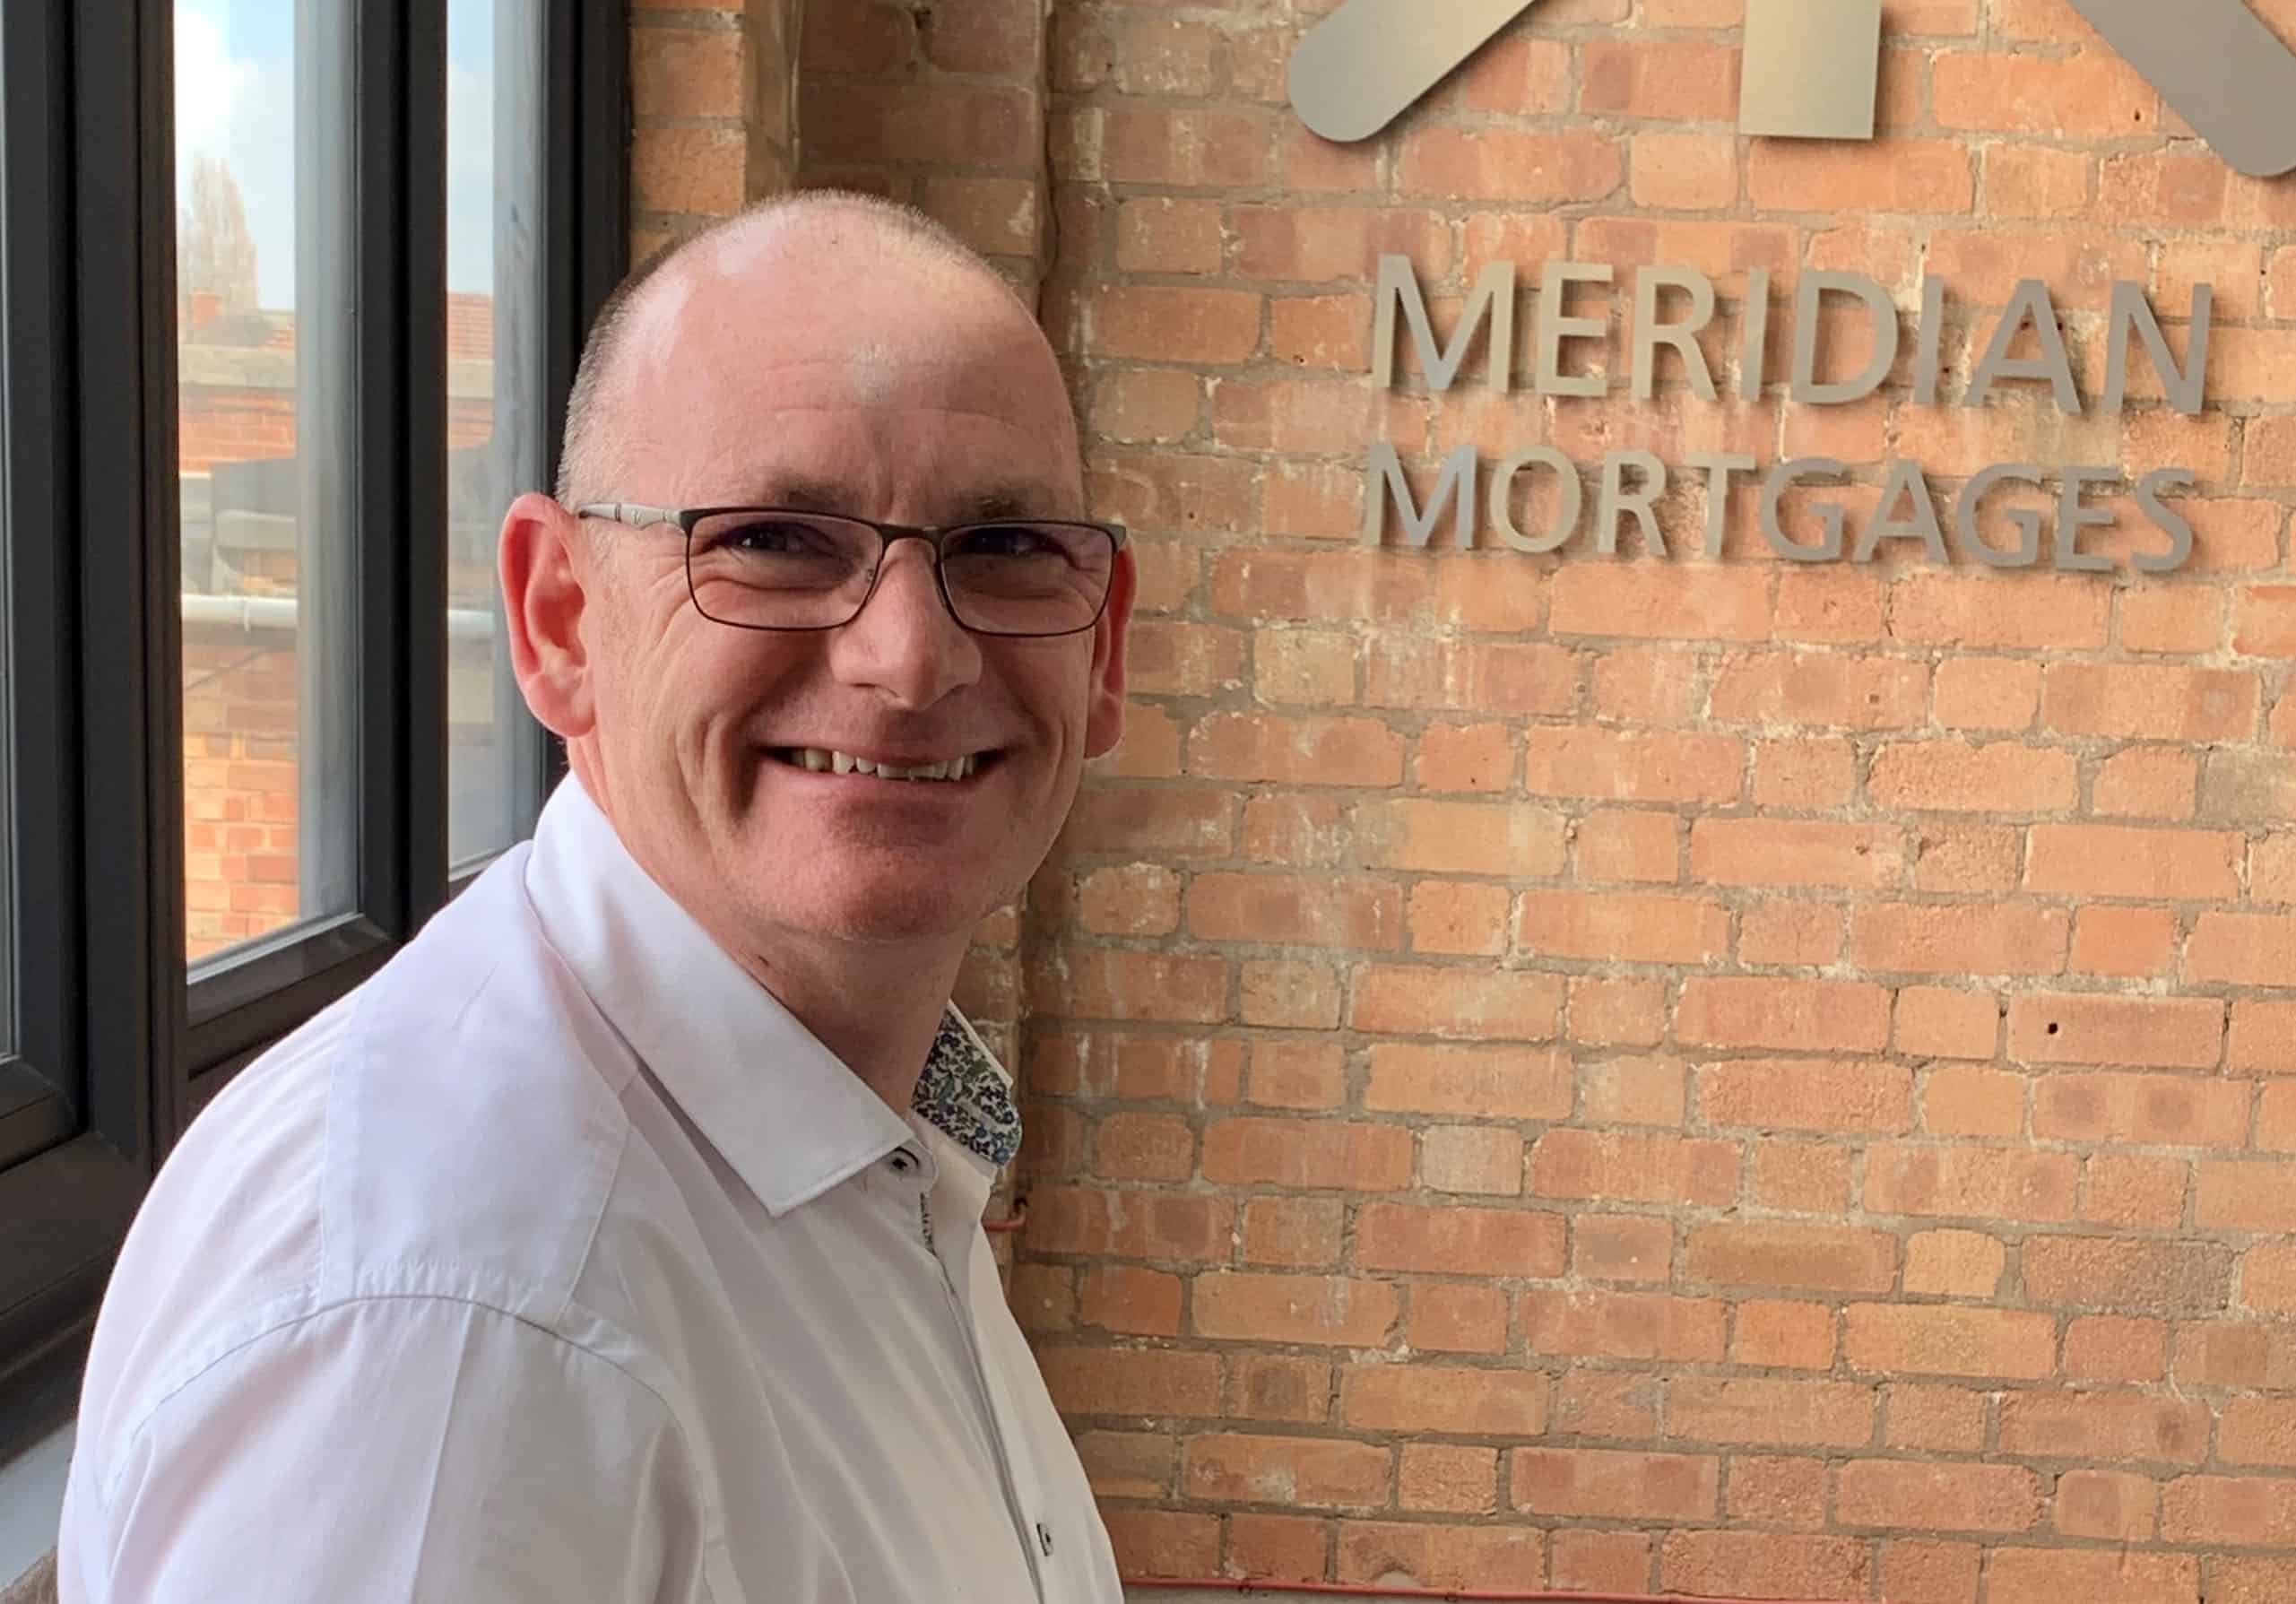 MAB supports Meridian Mortgages to acquire Metro Finance